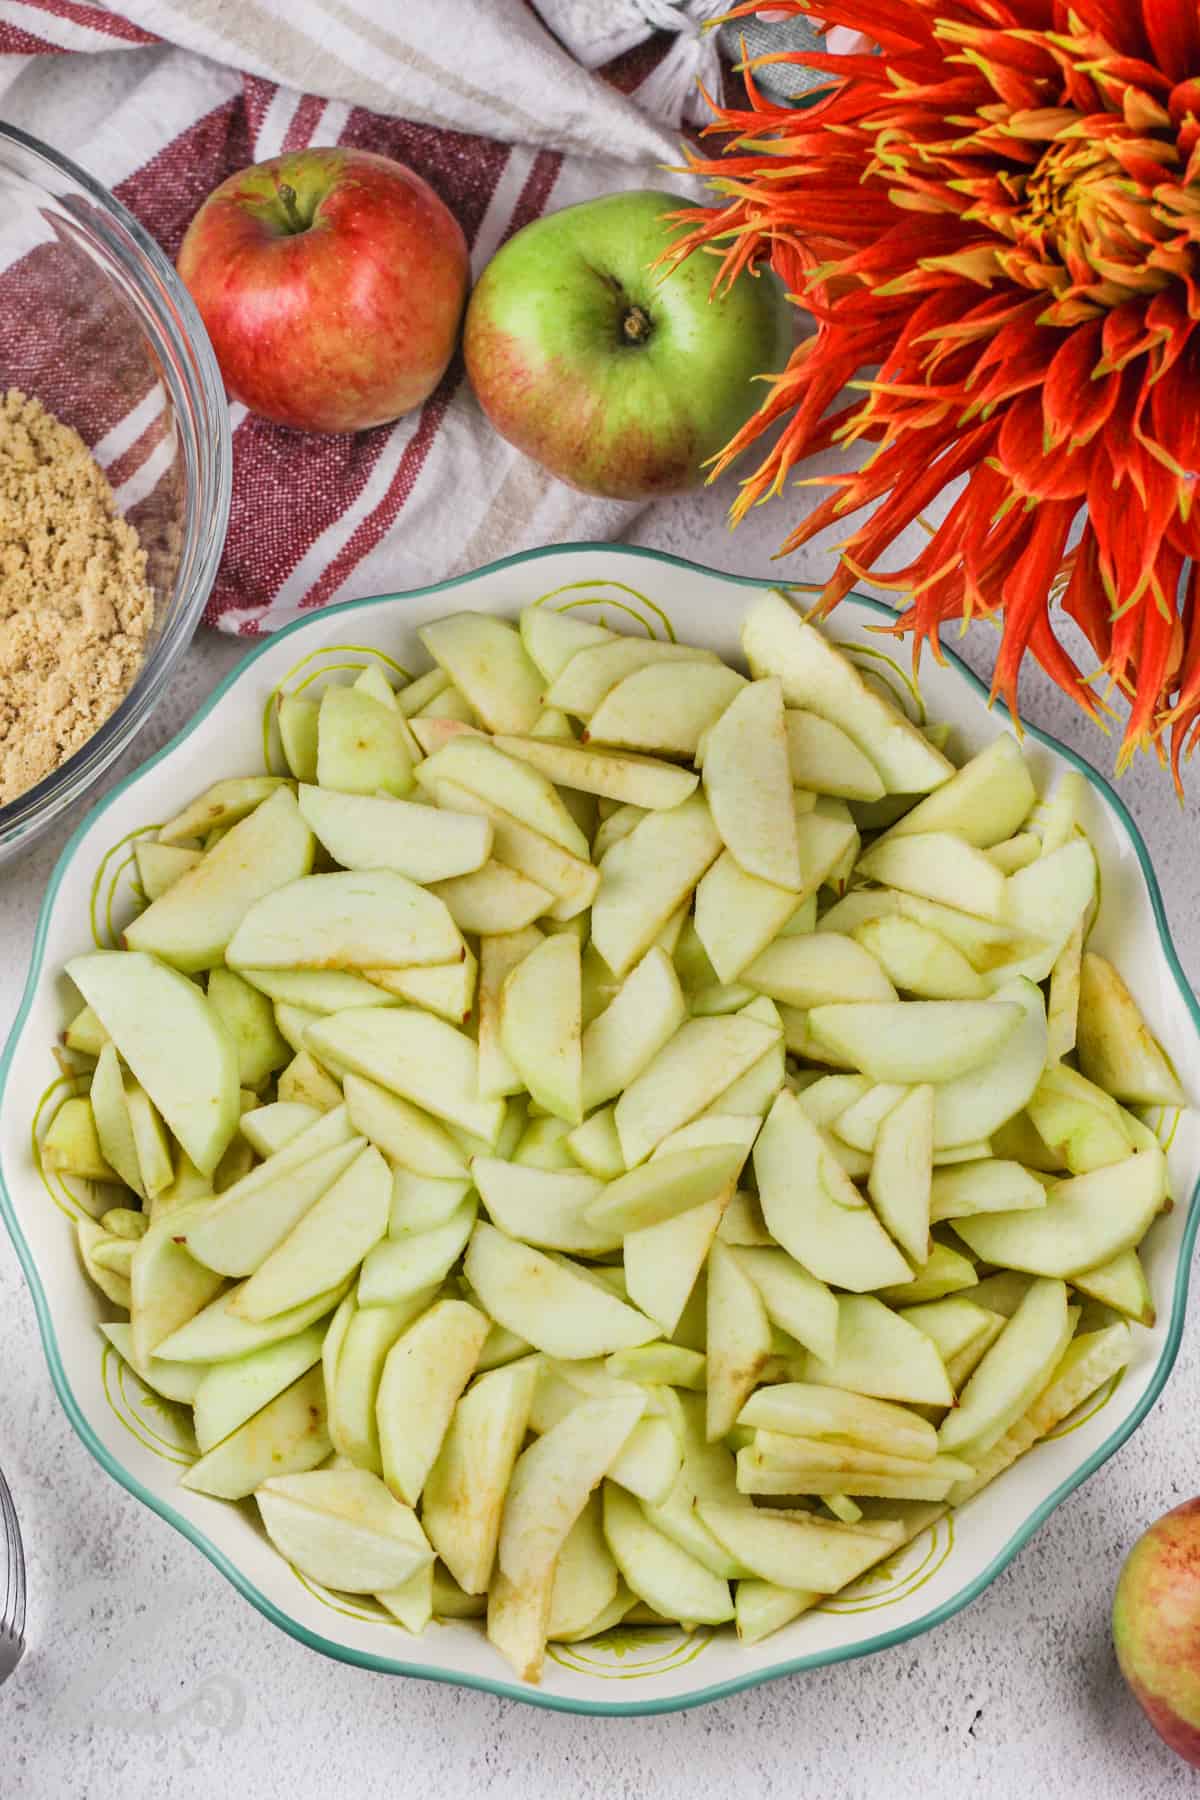 cut up apples in a bowl for Apple Crumble